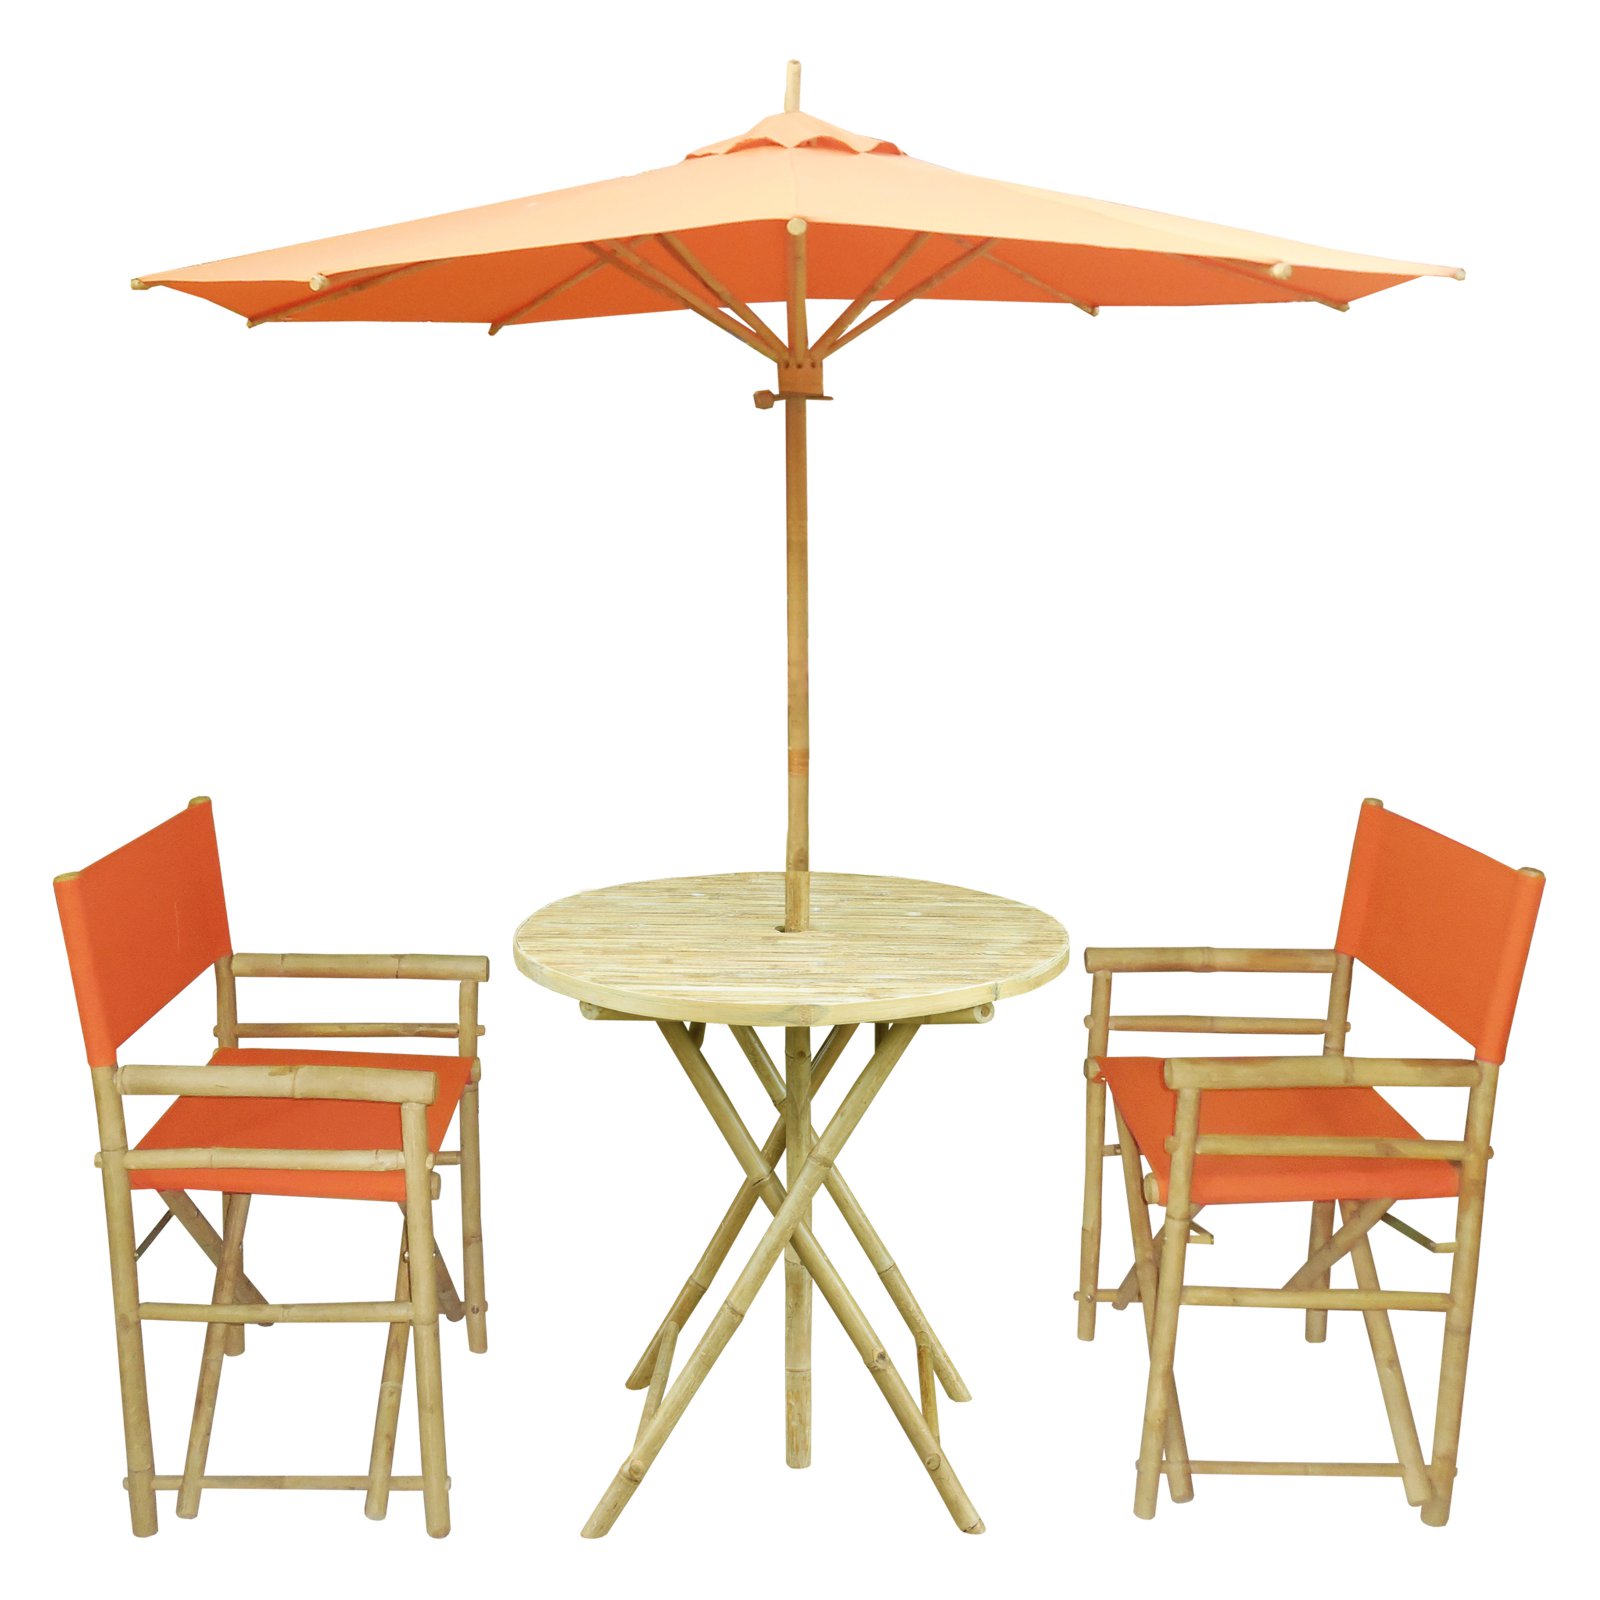 Statra Bamboo Square 3 Piece Patio Dining Set with Matching Umbrella - image 2 of 2